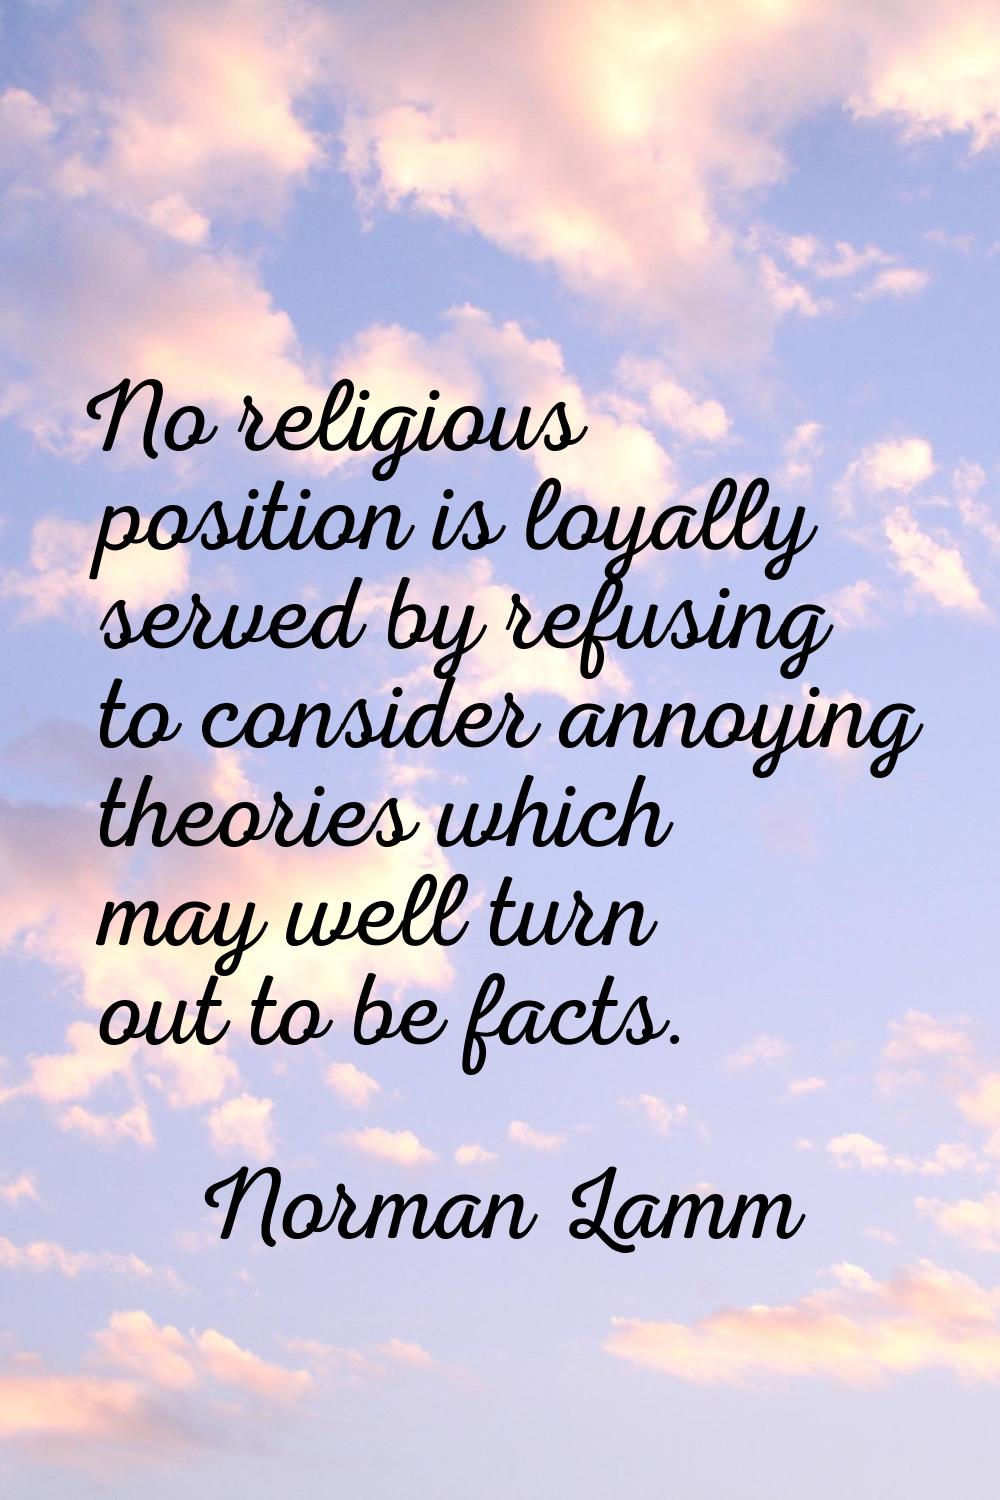 No religious position is loyally served by refusing to consider annoying theories which may well tu